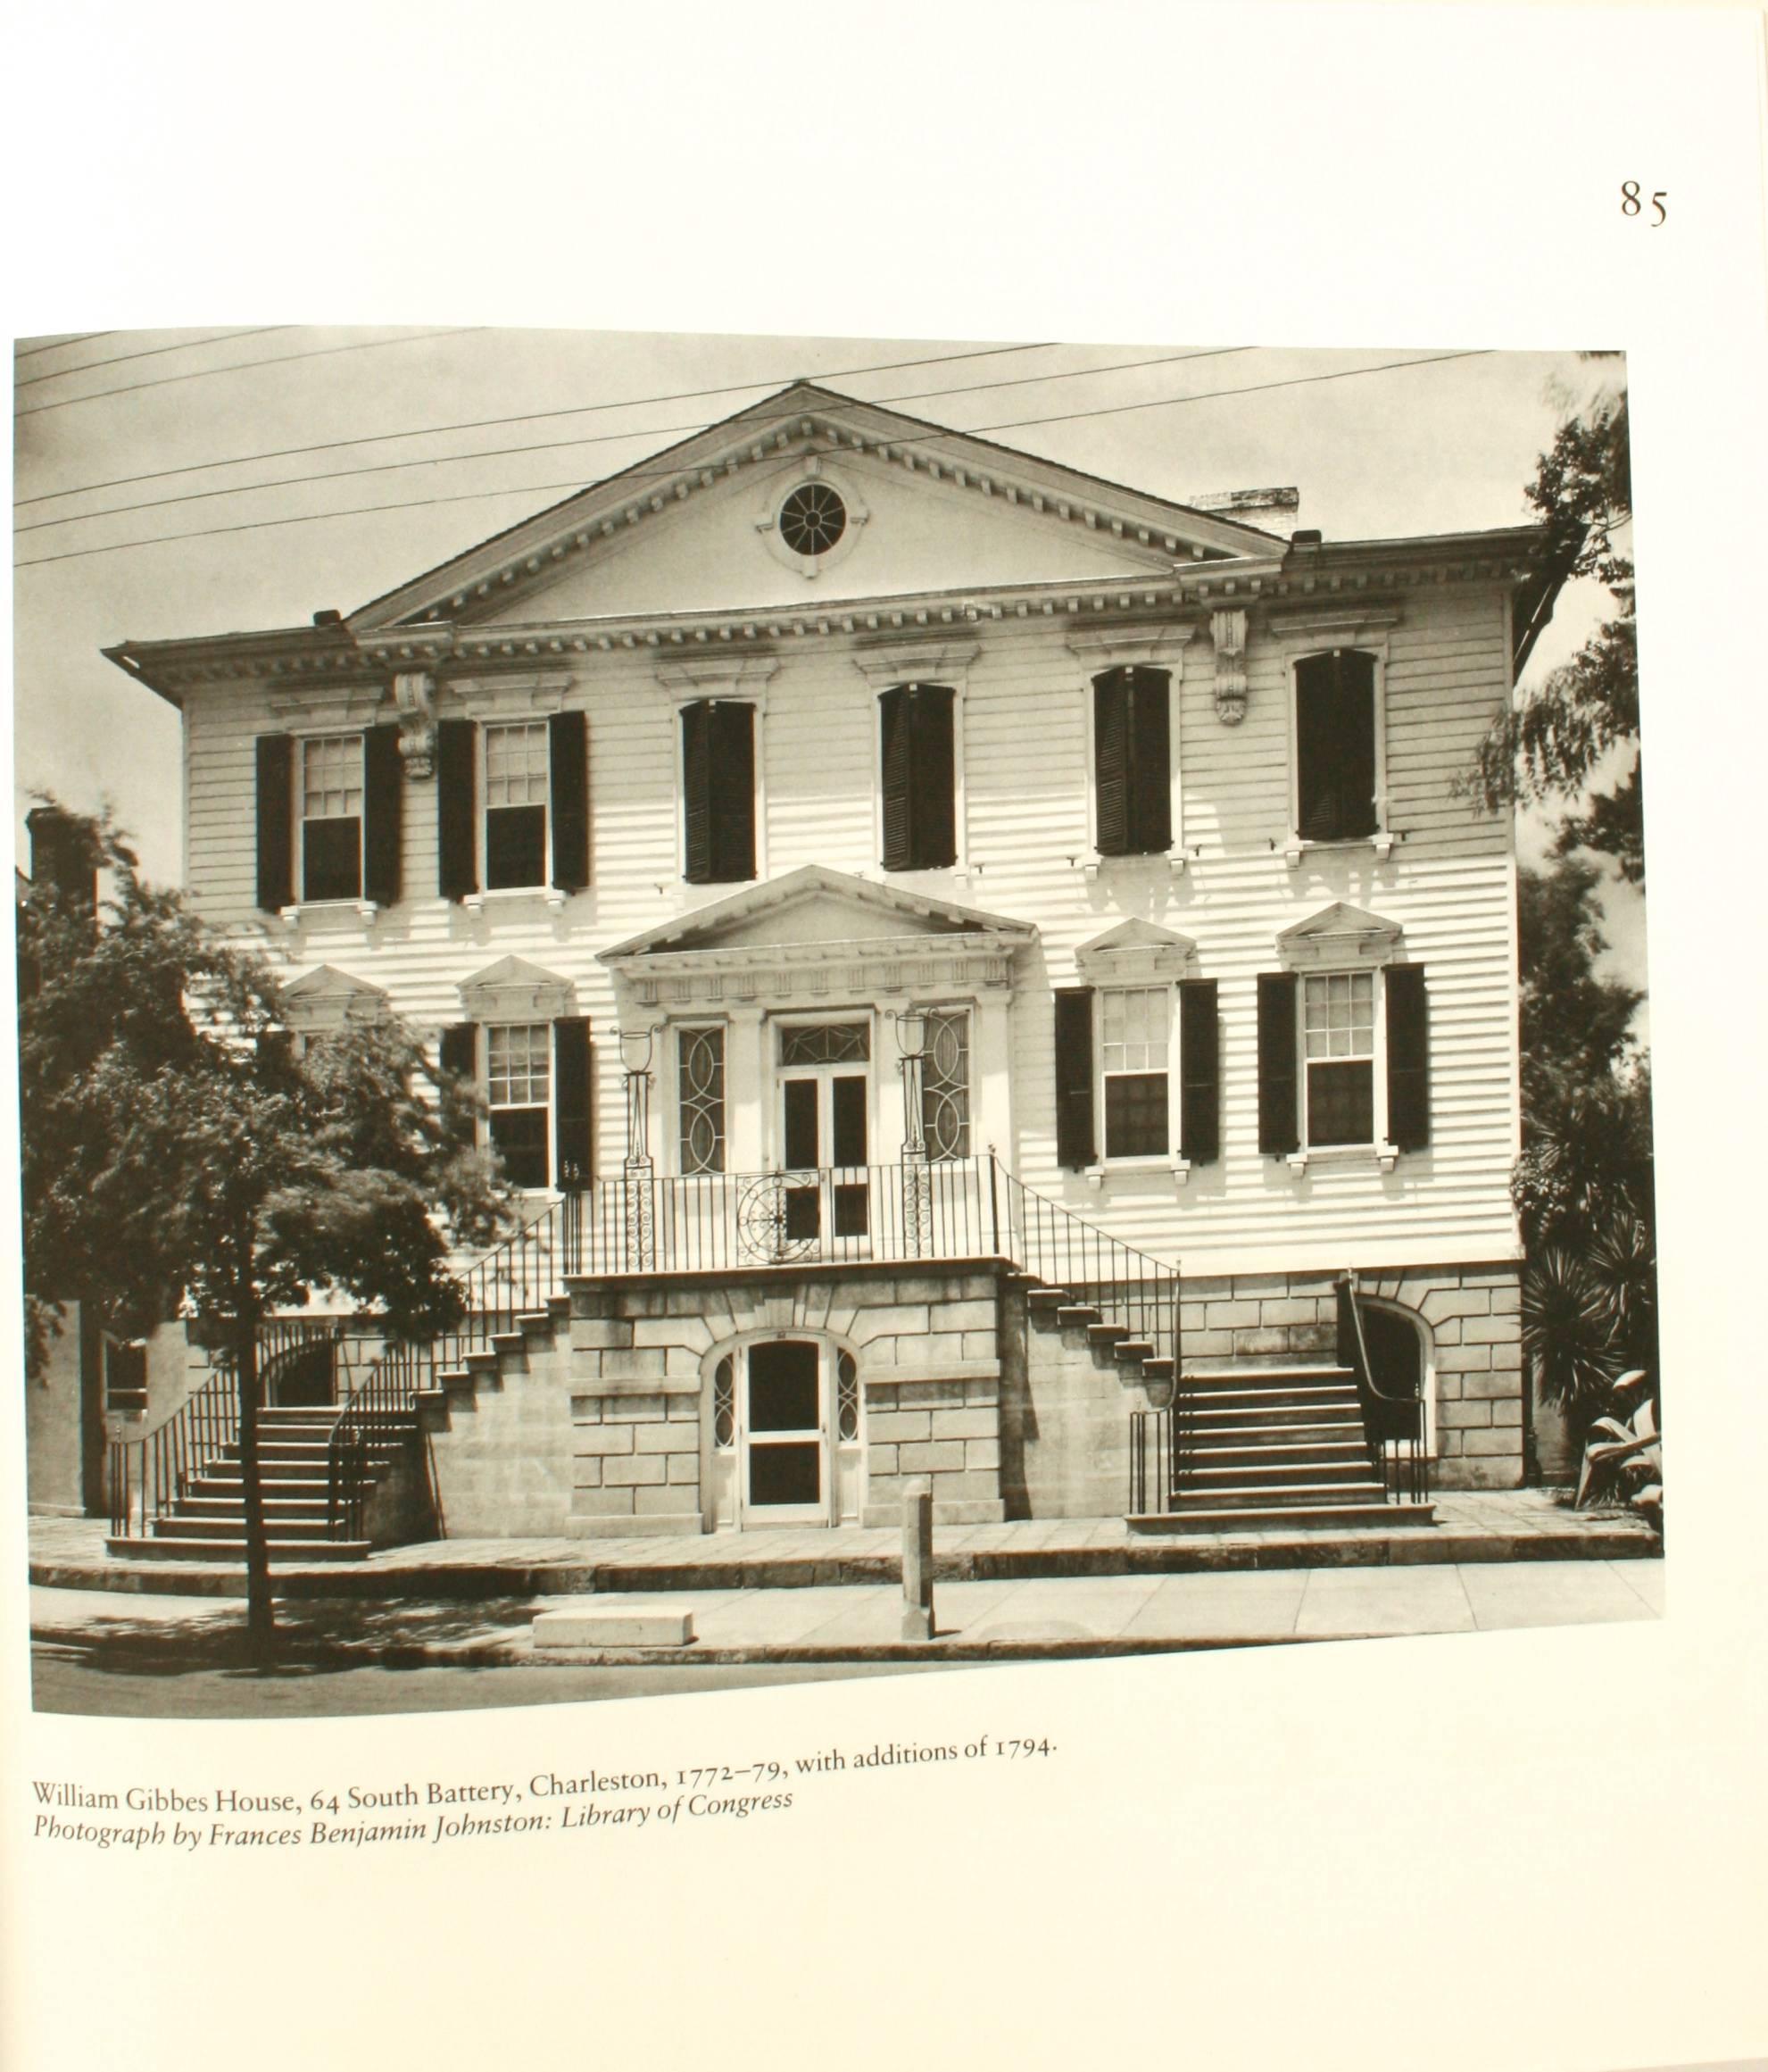 Paper Architecture of the Old South: South Carolina First Edition by Mills Lane